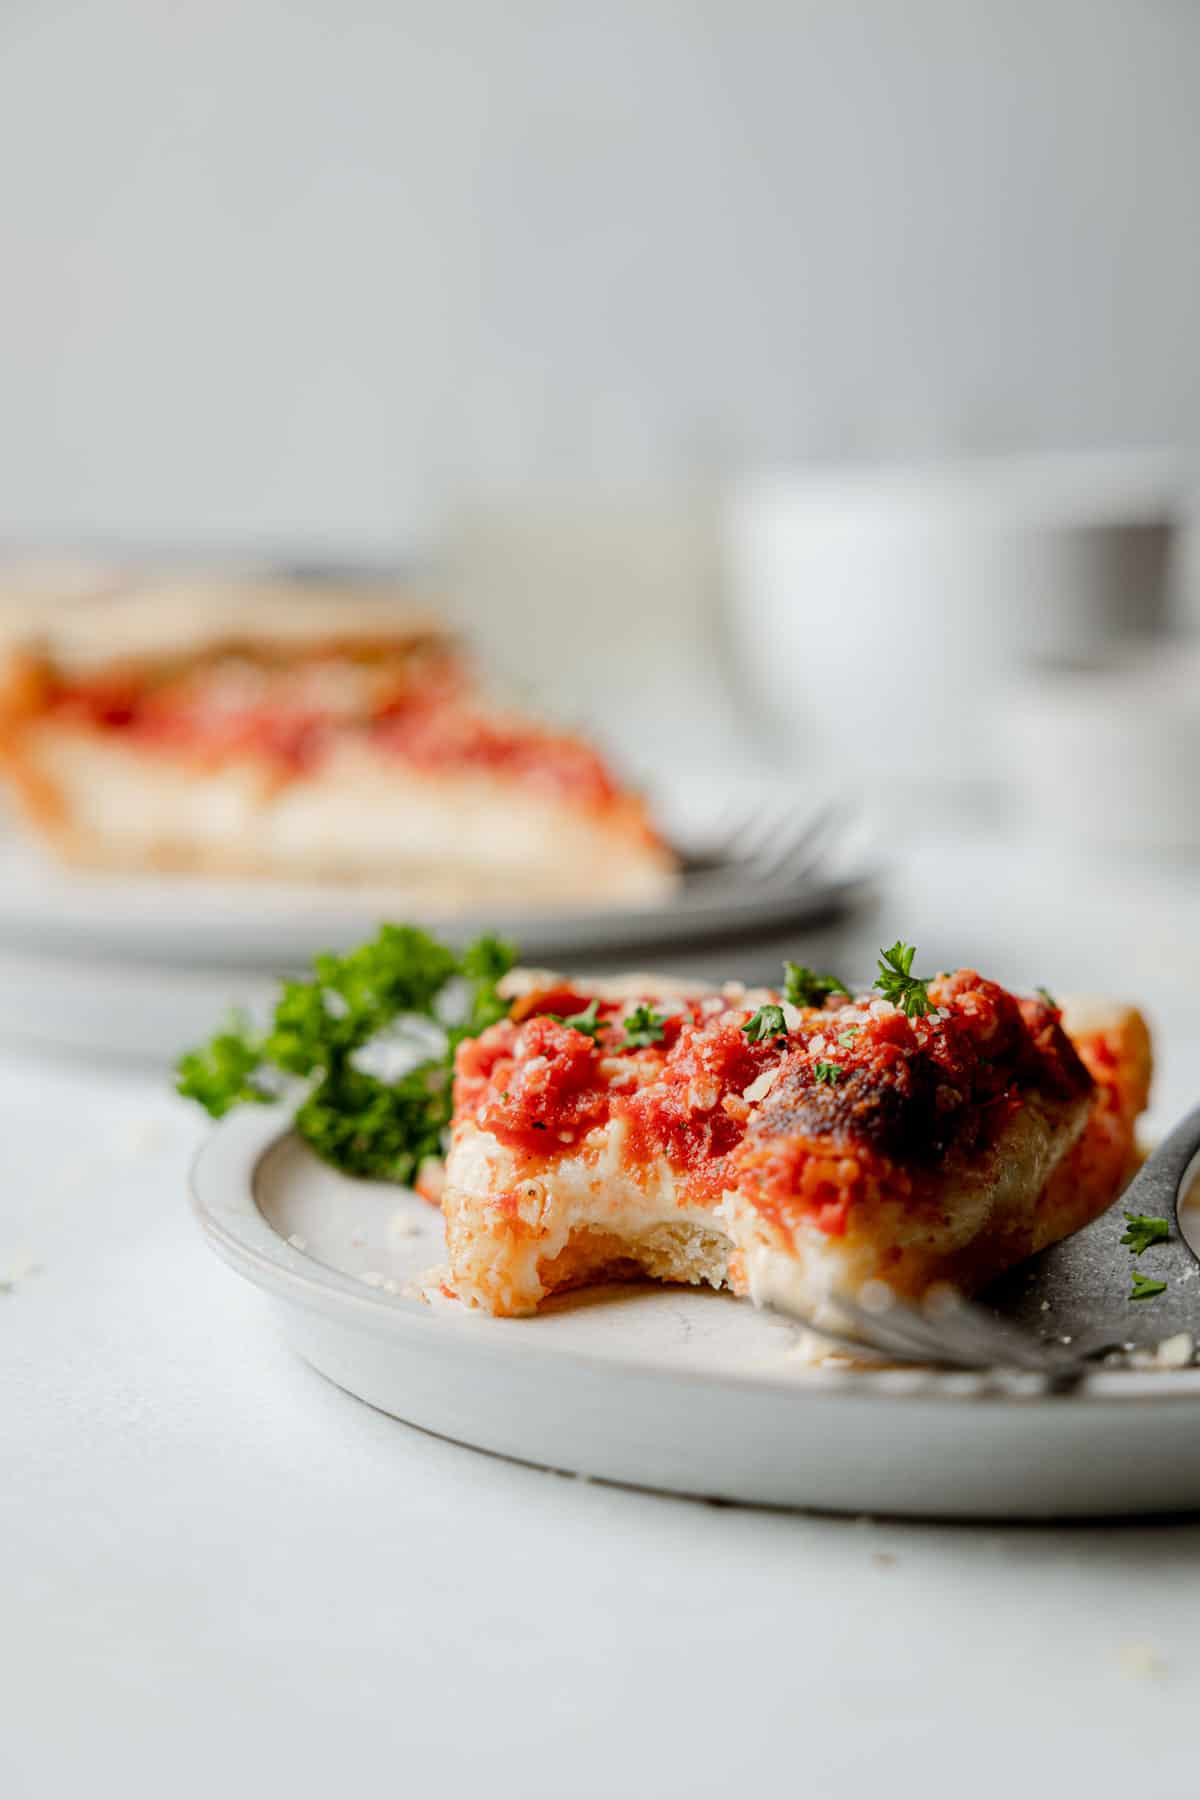 A slice of gluten free deep dish pizza on a small plate with bite taken, garnished with parsley.